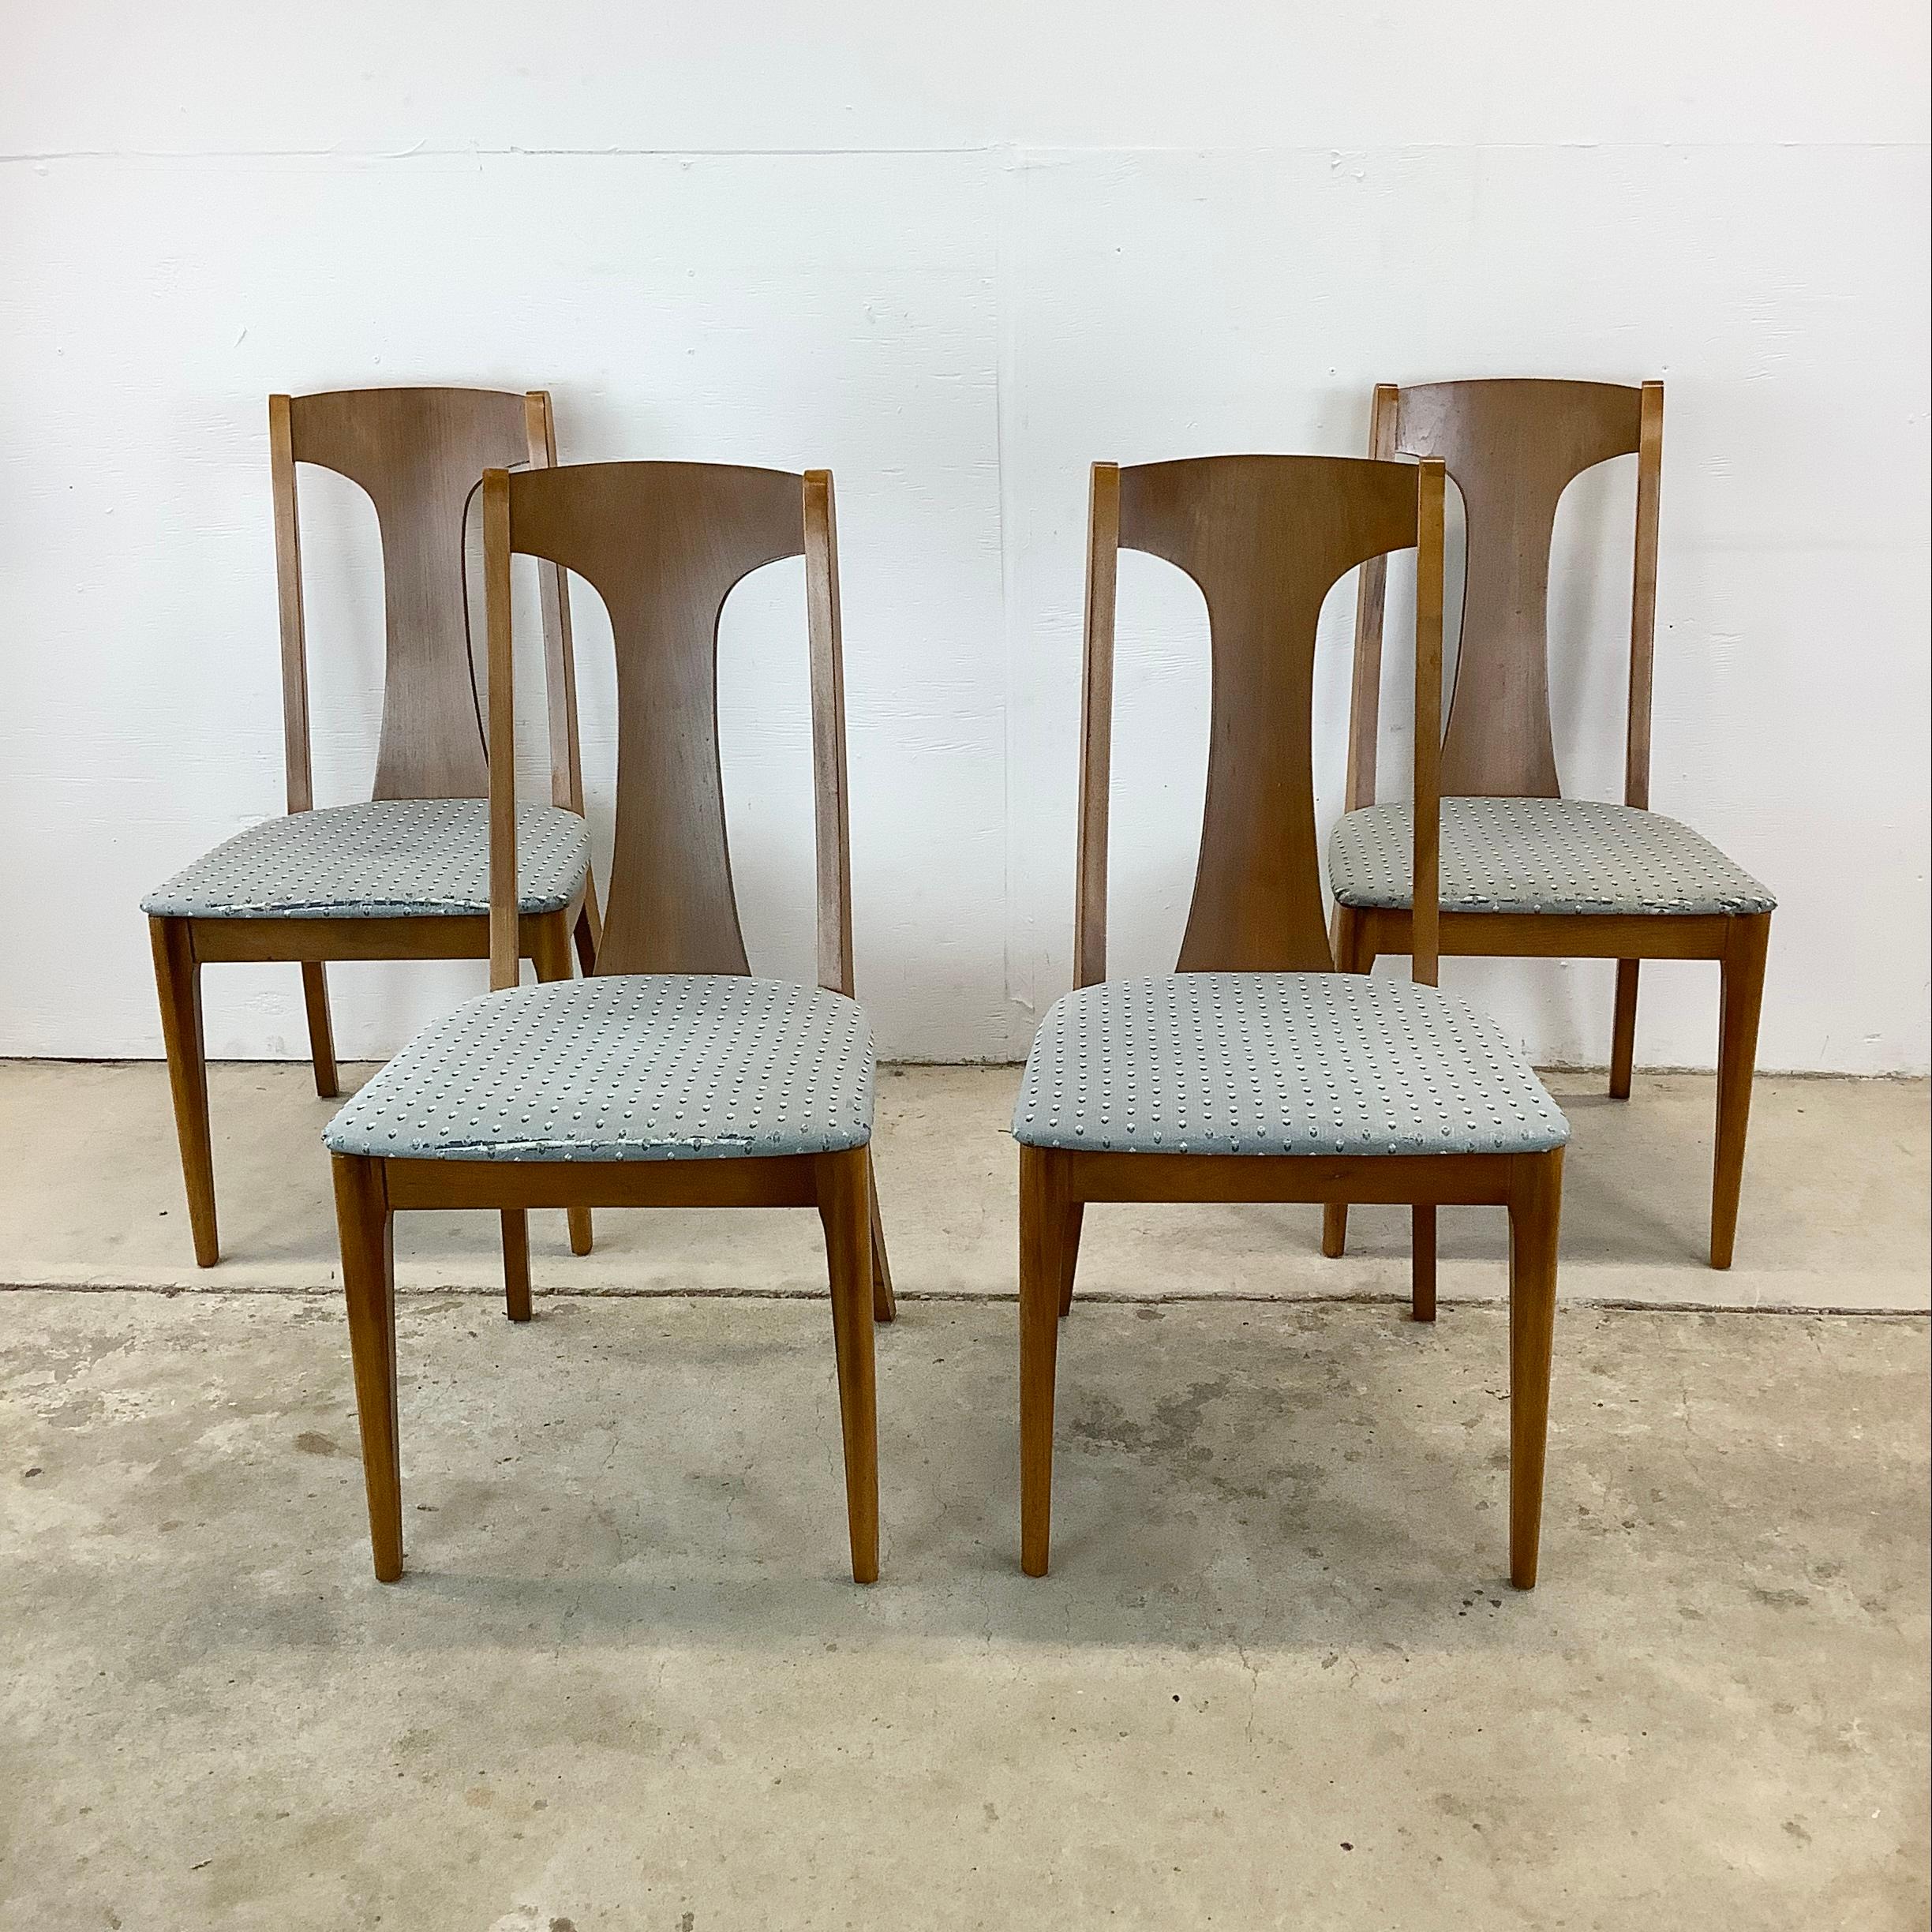 Step into retro style with this set of four Mid-Century Walnut Dining Chairs from Kroehler Furniture, crafted in the style of the iconic Broyhill Brasilia collection. Each chair is a testament to the era's love for sleek lines and warm walnut